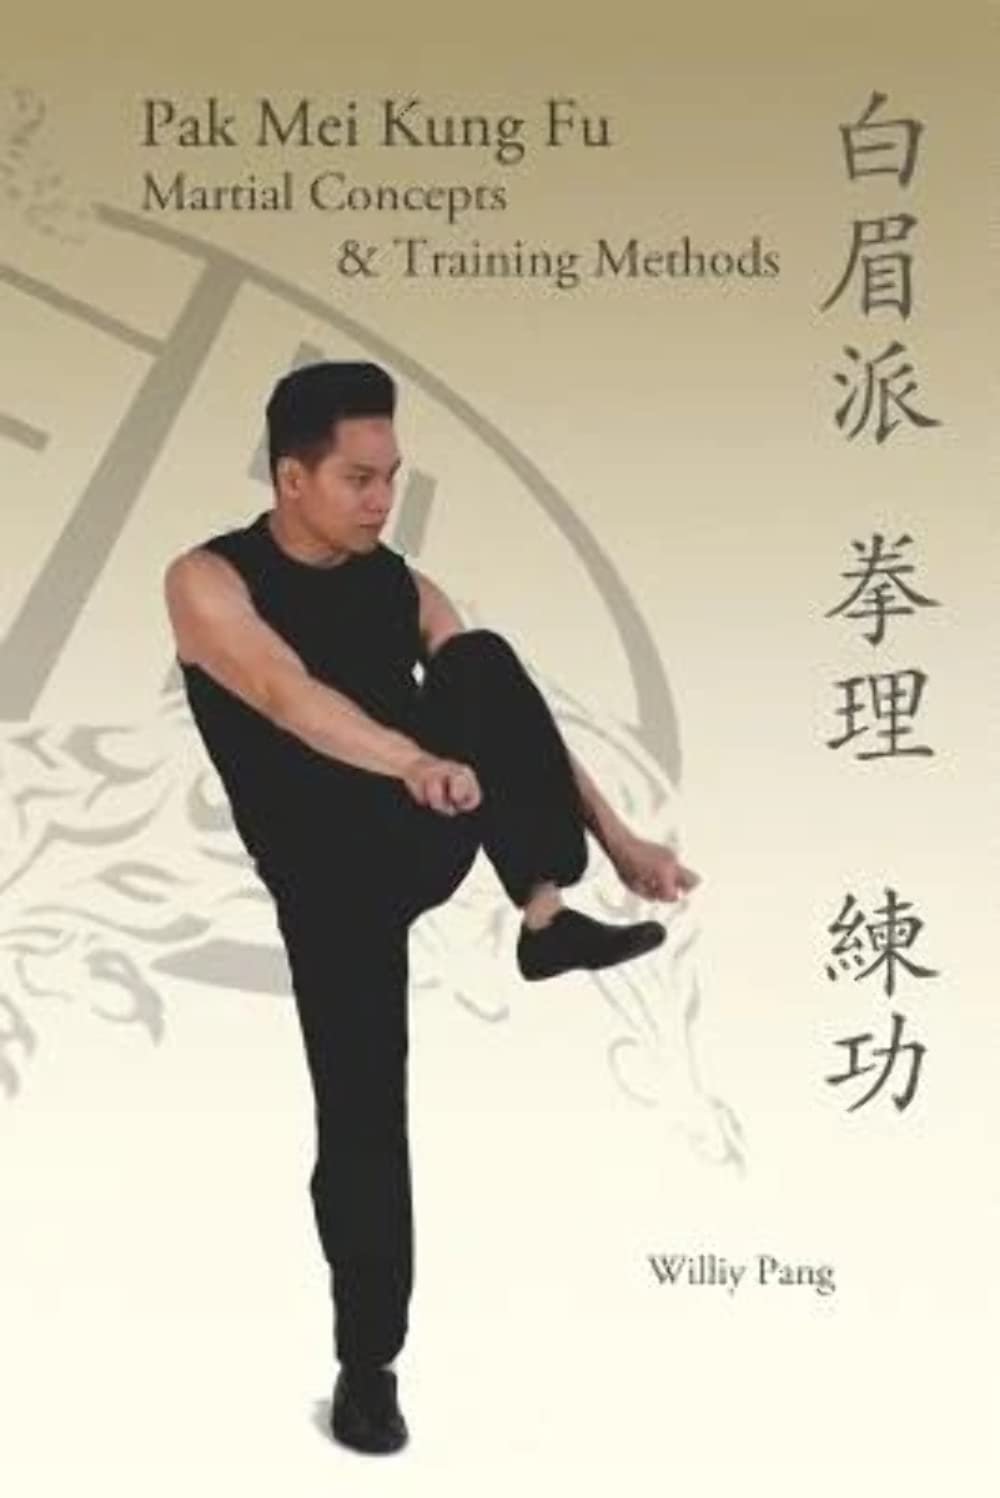 Pak Mei Kung Fu: Martial Concepts & Training Methods Book by Willy Pang